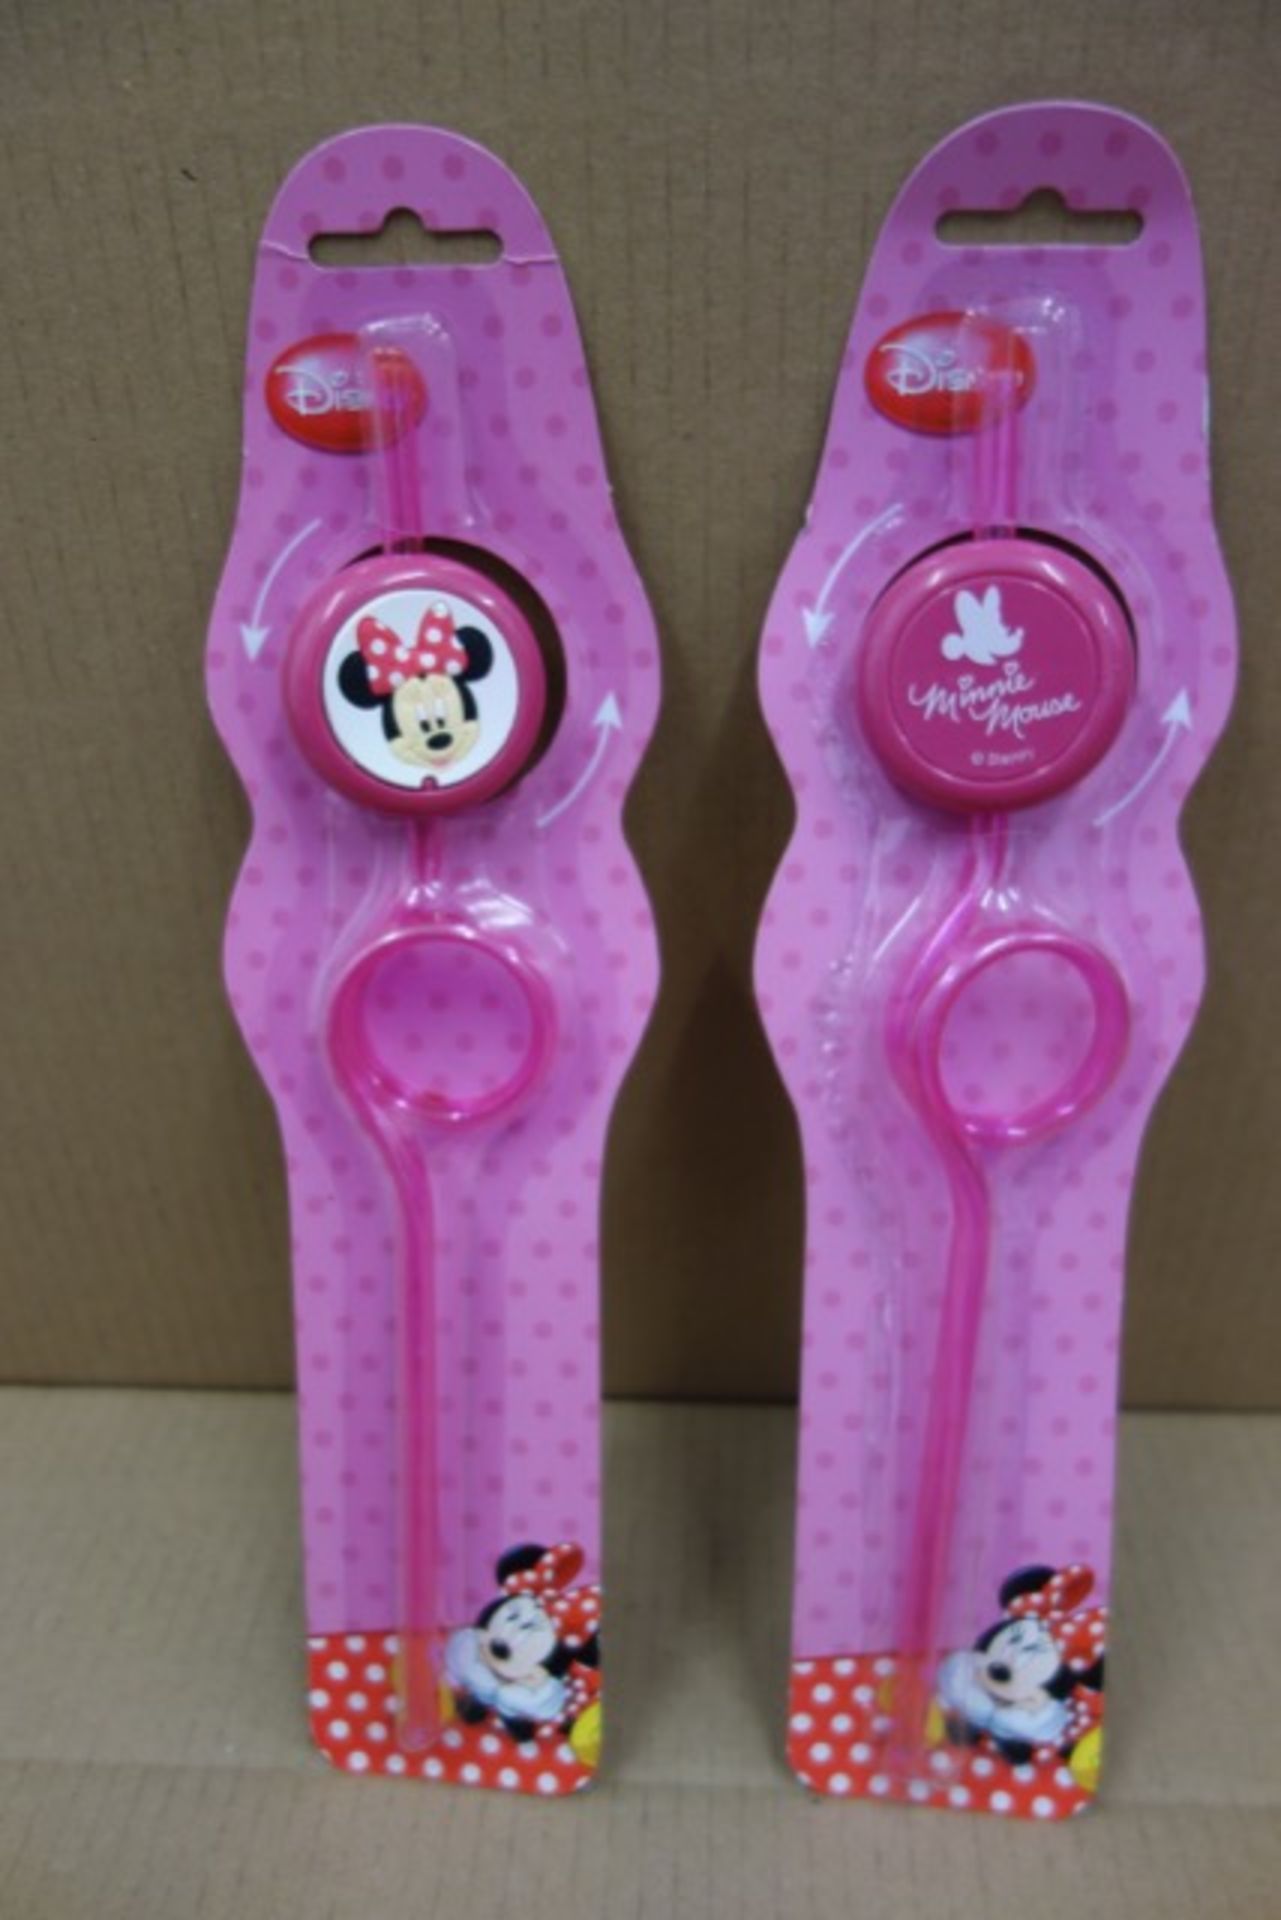 192 x Disney Minnie Mouse Swirly Spining Straw's. Fun for kids of all ages! Minnie spins as you take